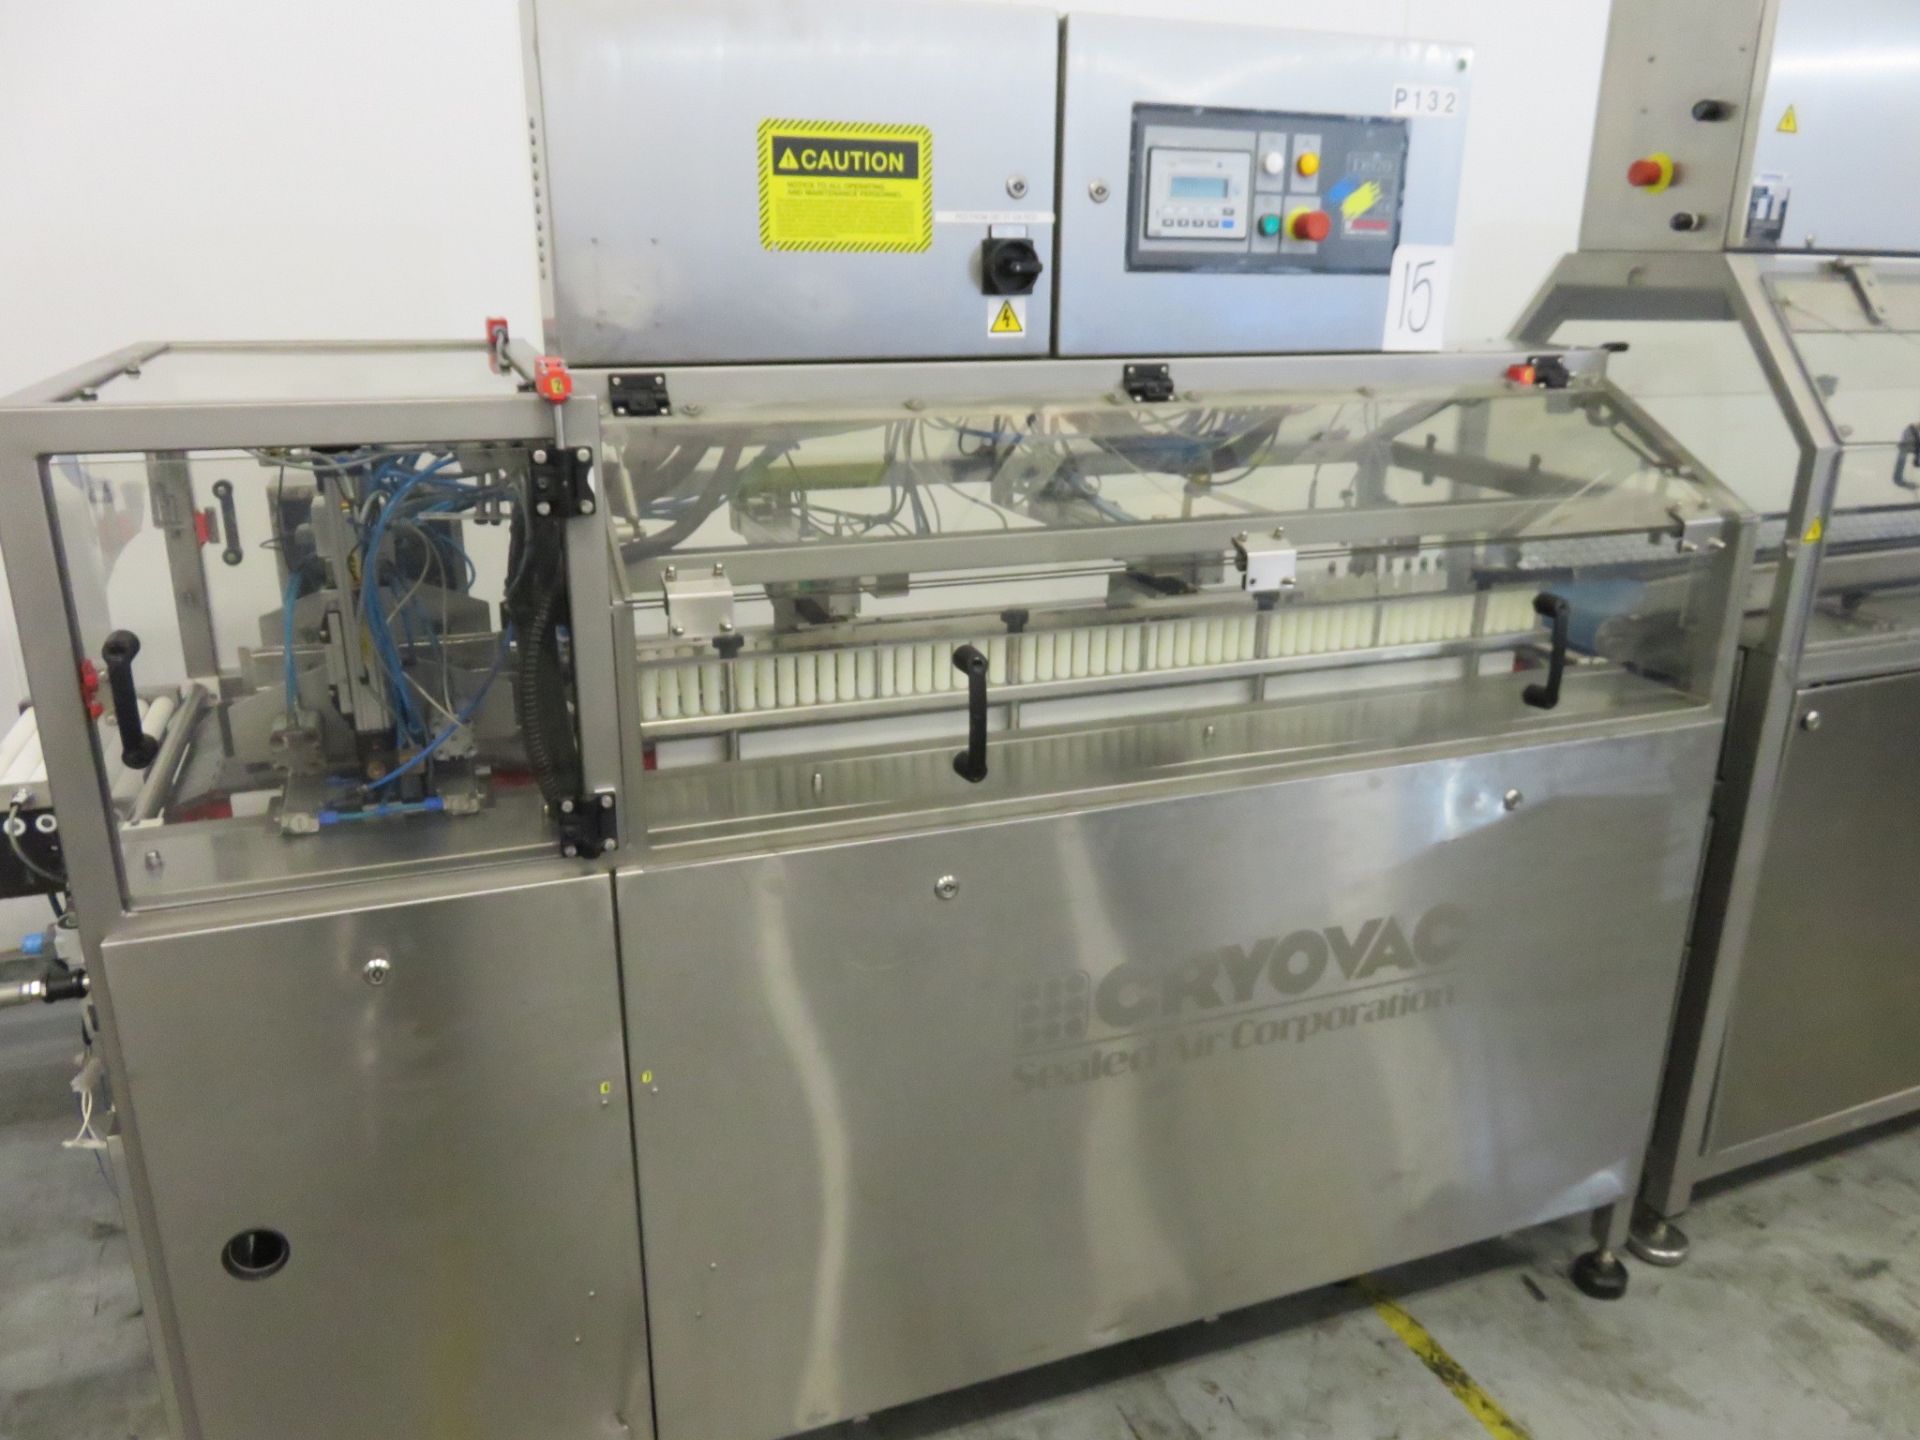 Cryovac DS70 cheese collator 4 lane into single lane ready for bagging.Takes 20kgLIFT OUT CHARGE£60